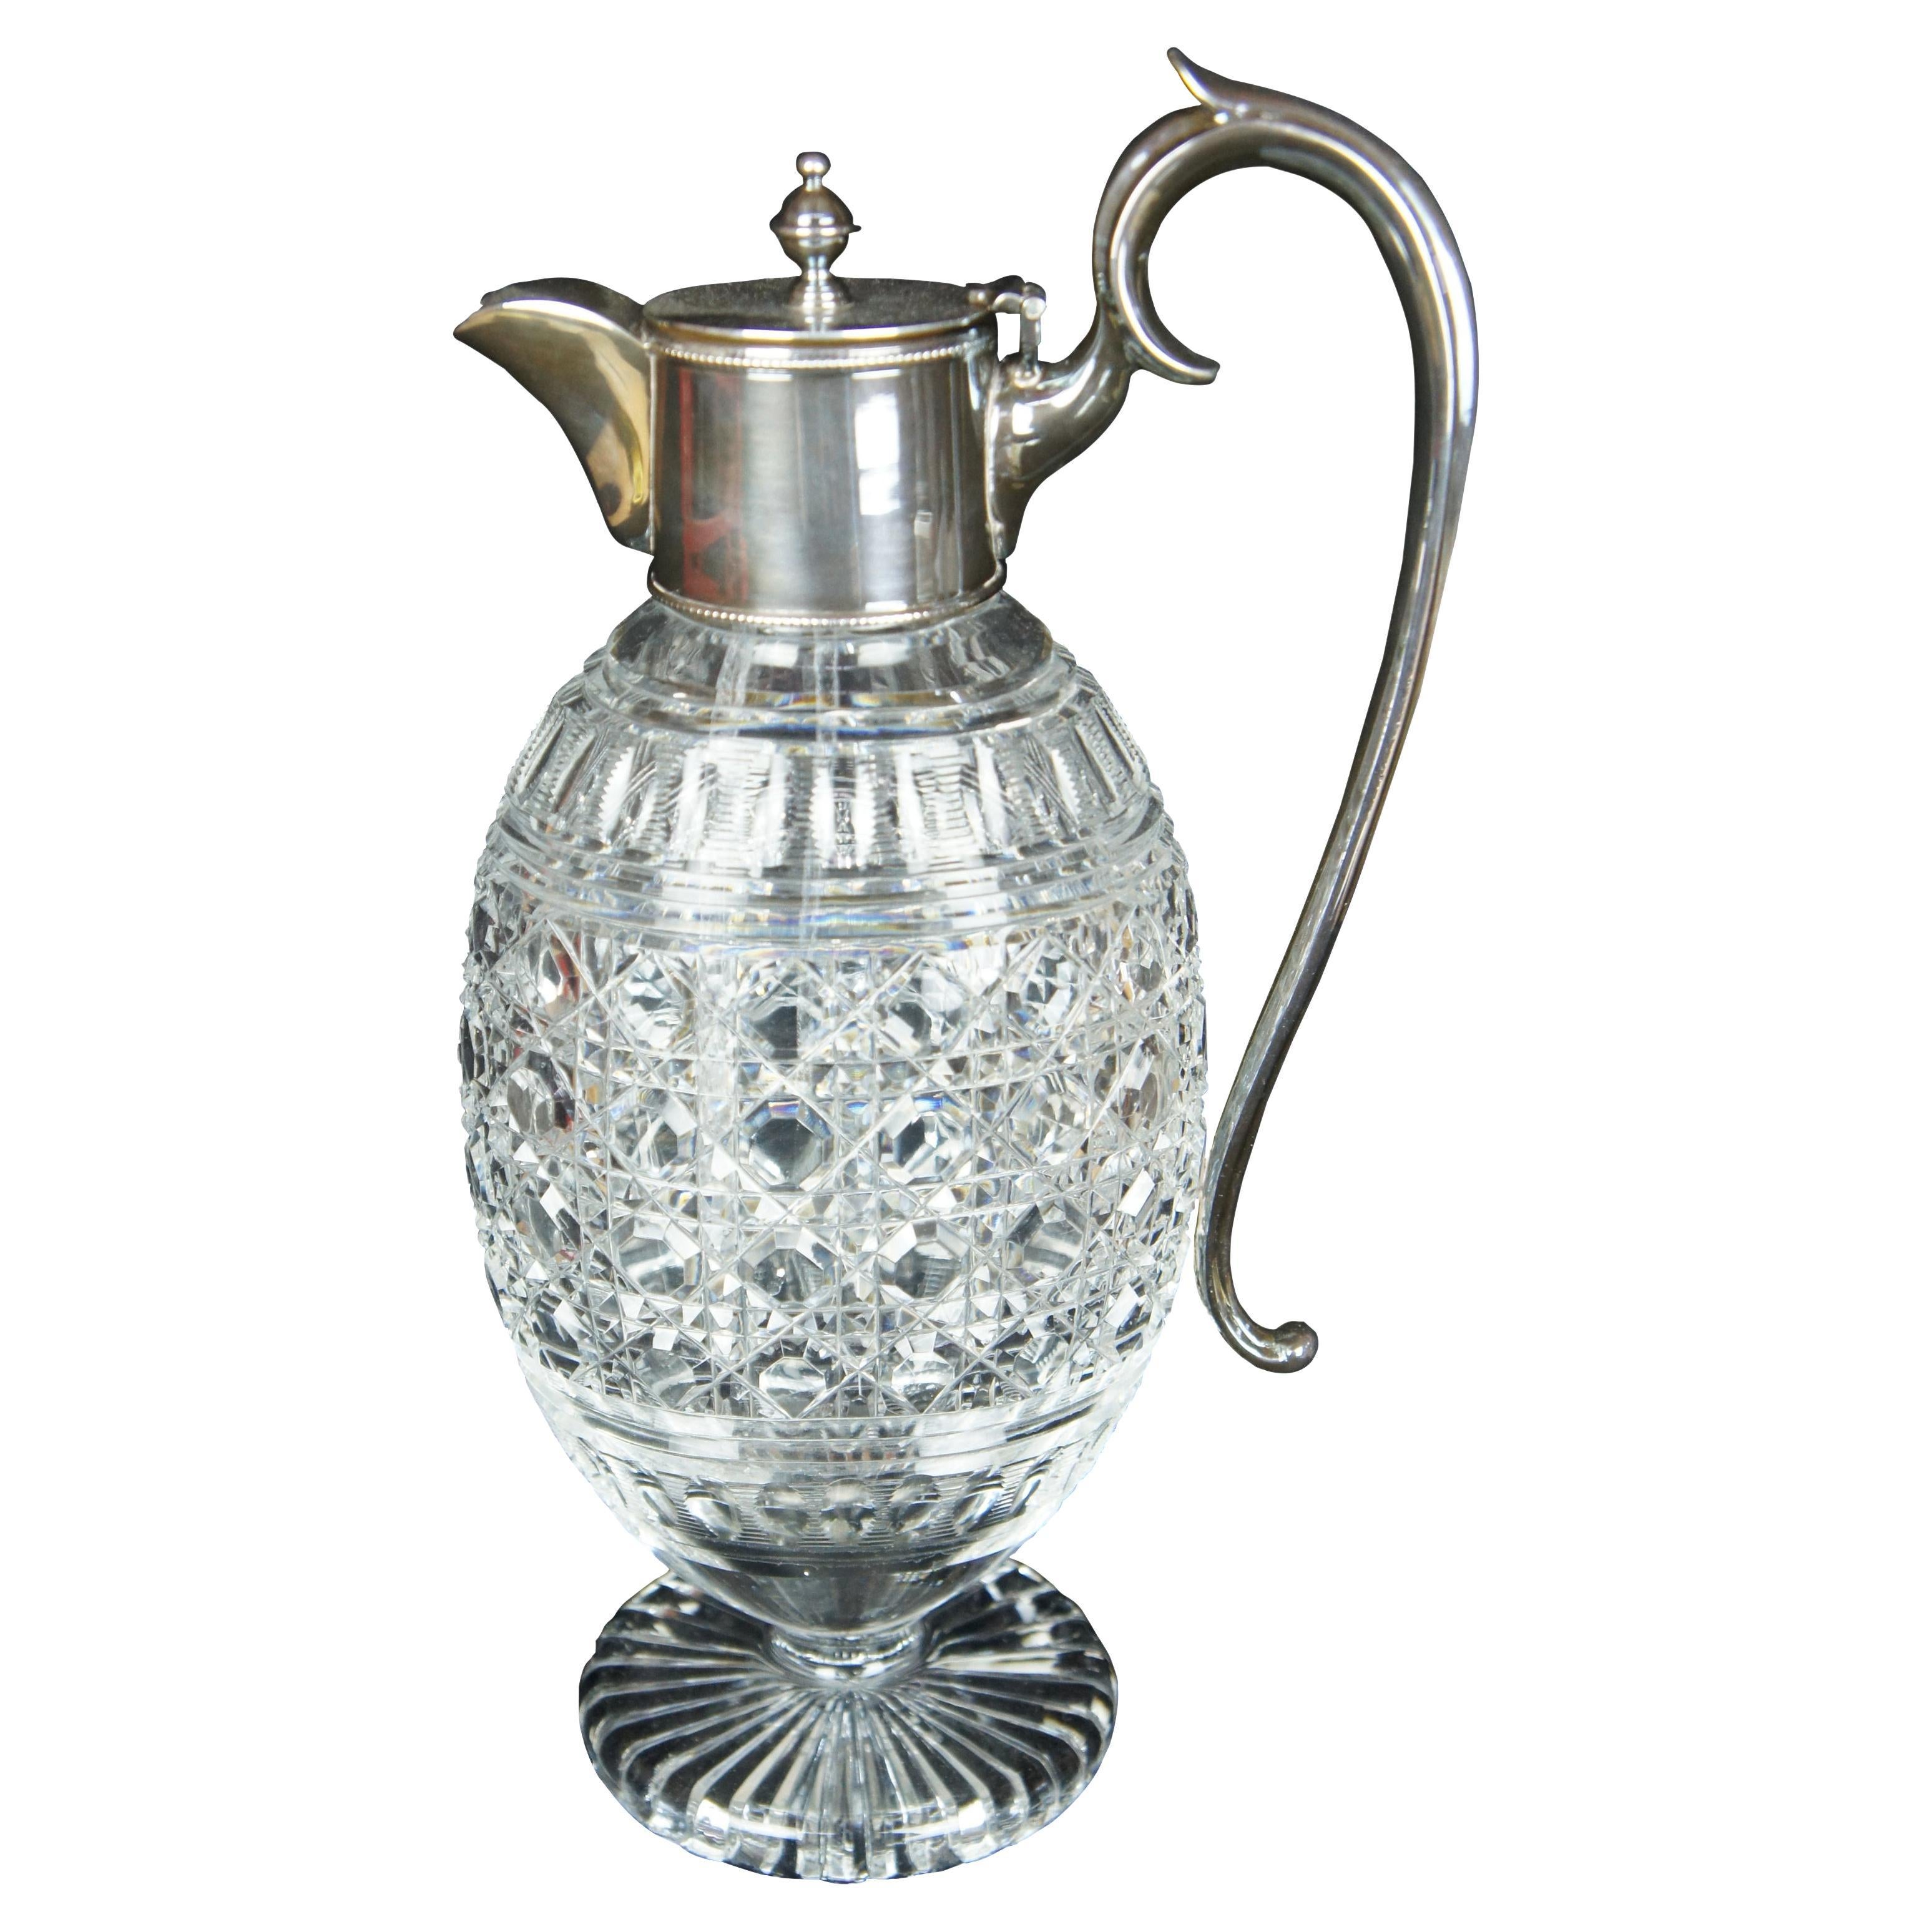 Antique Victorian Cut Crystal Silver Plated Claret Jug Coffee Beverage Pitcher For Sale